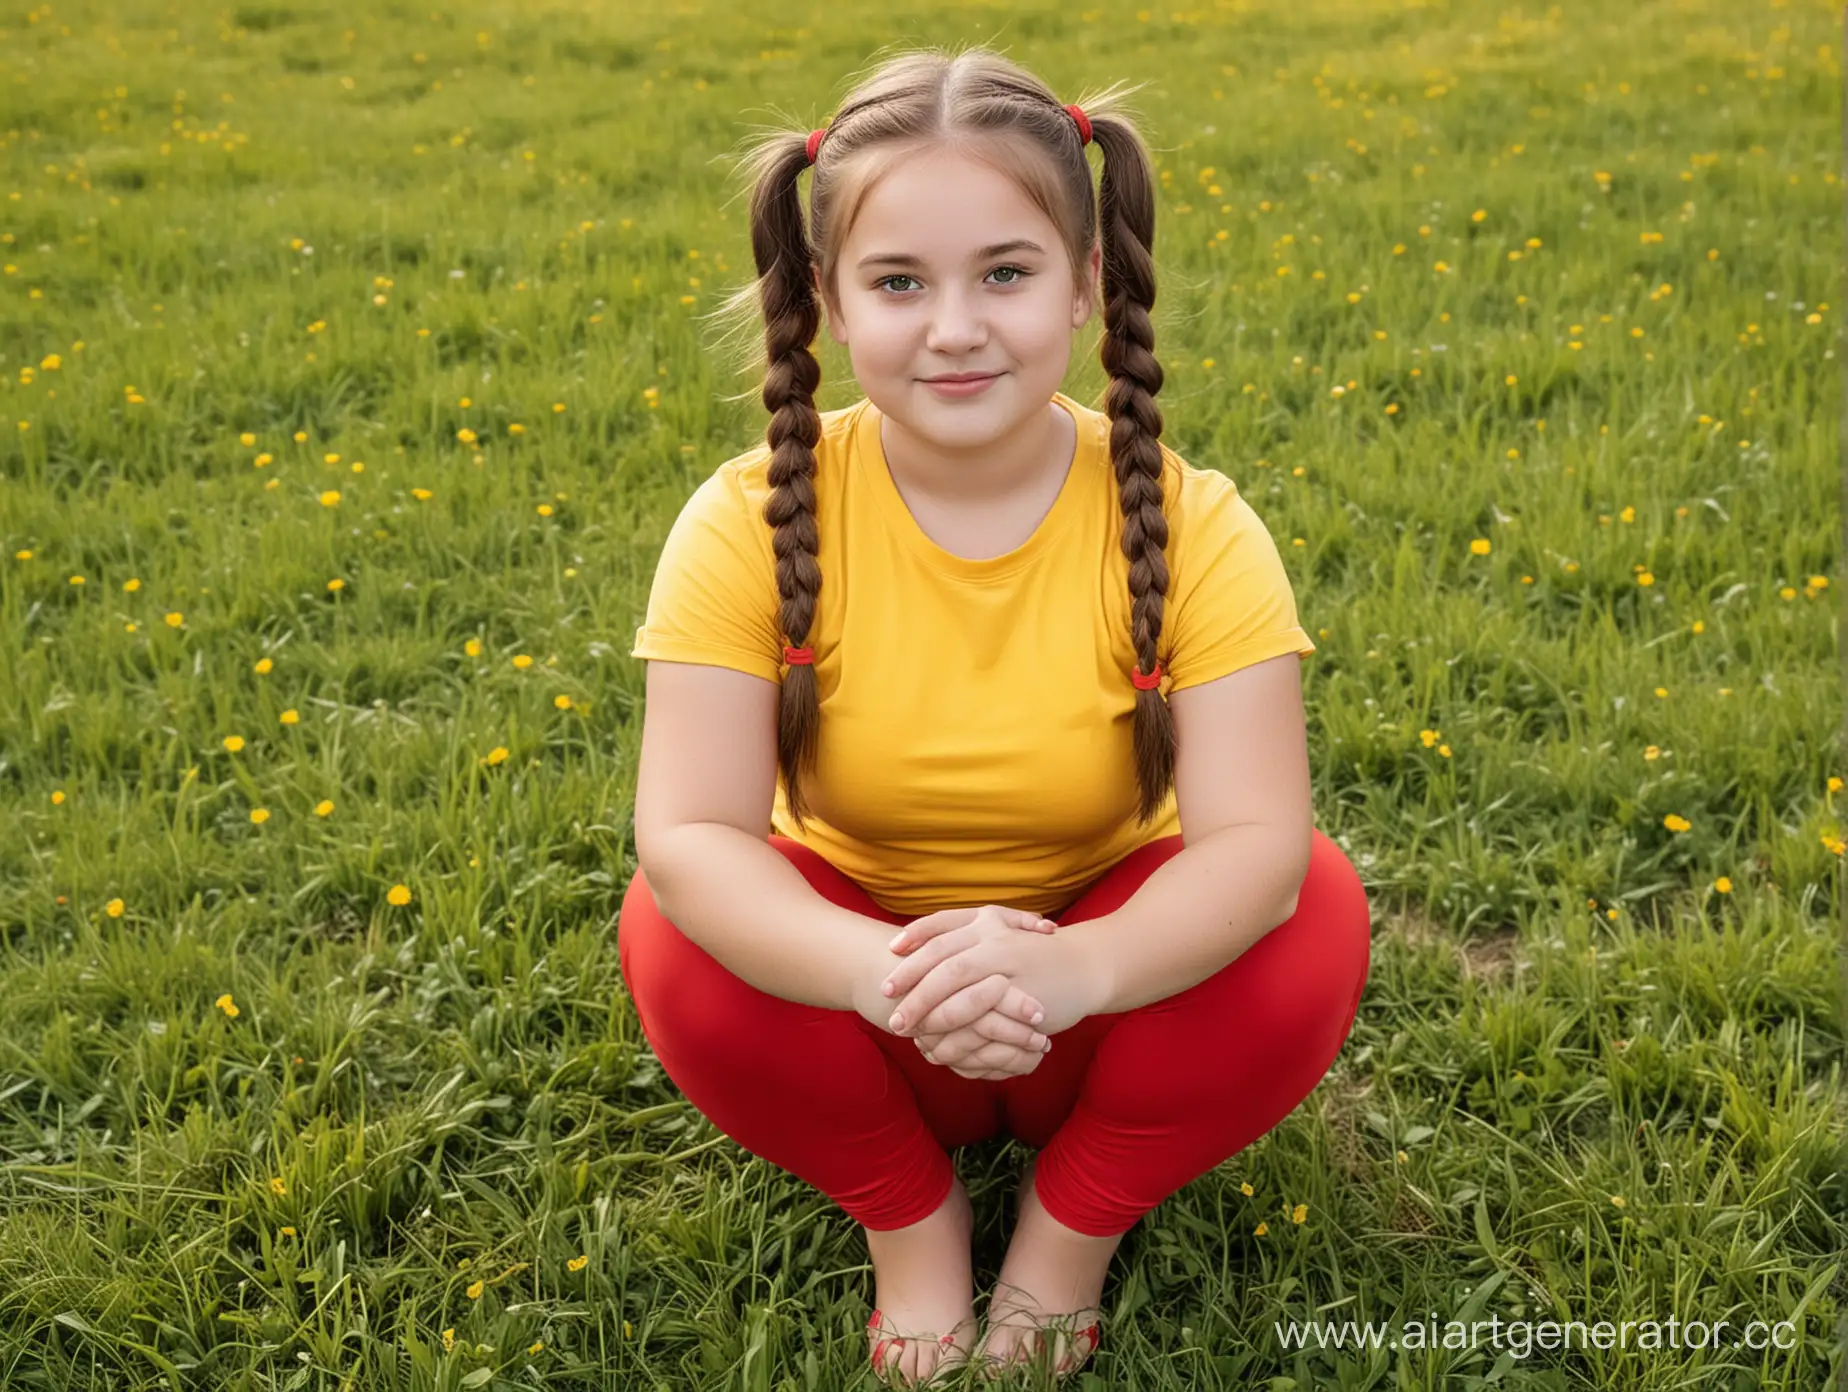 a chubby 12-13 years girl with two pigtails, round face, dressed in red leggins, yelow T-shirt, squatting in the grass. front view